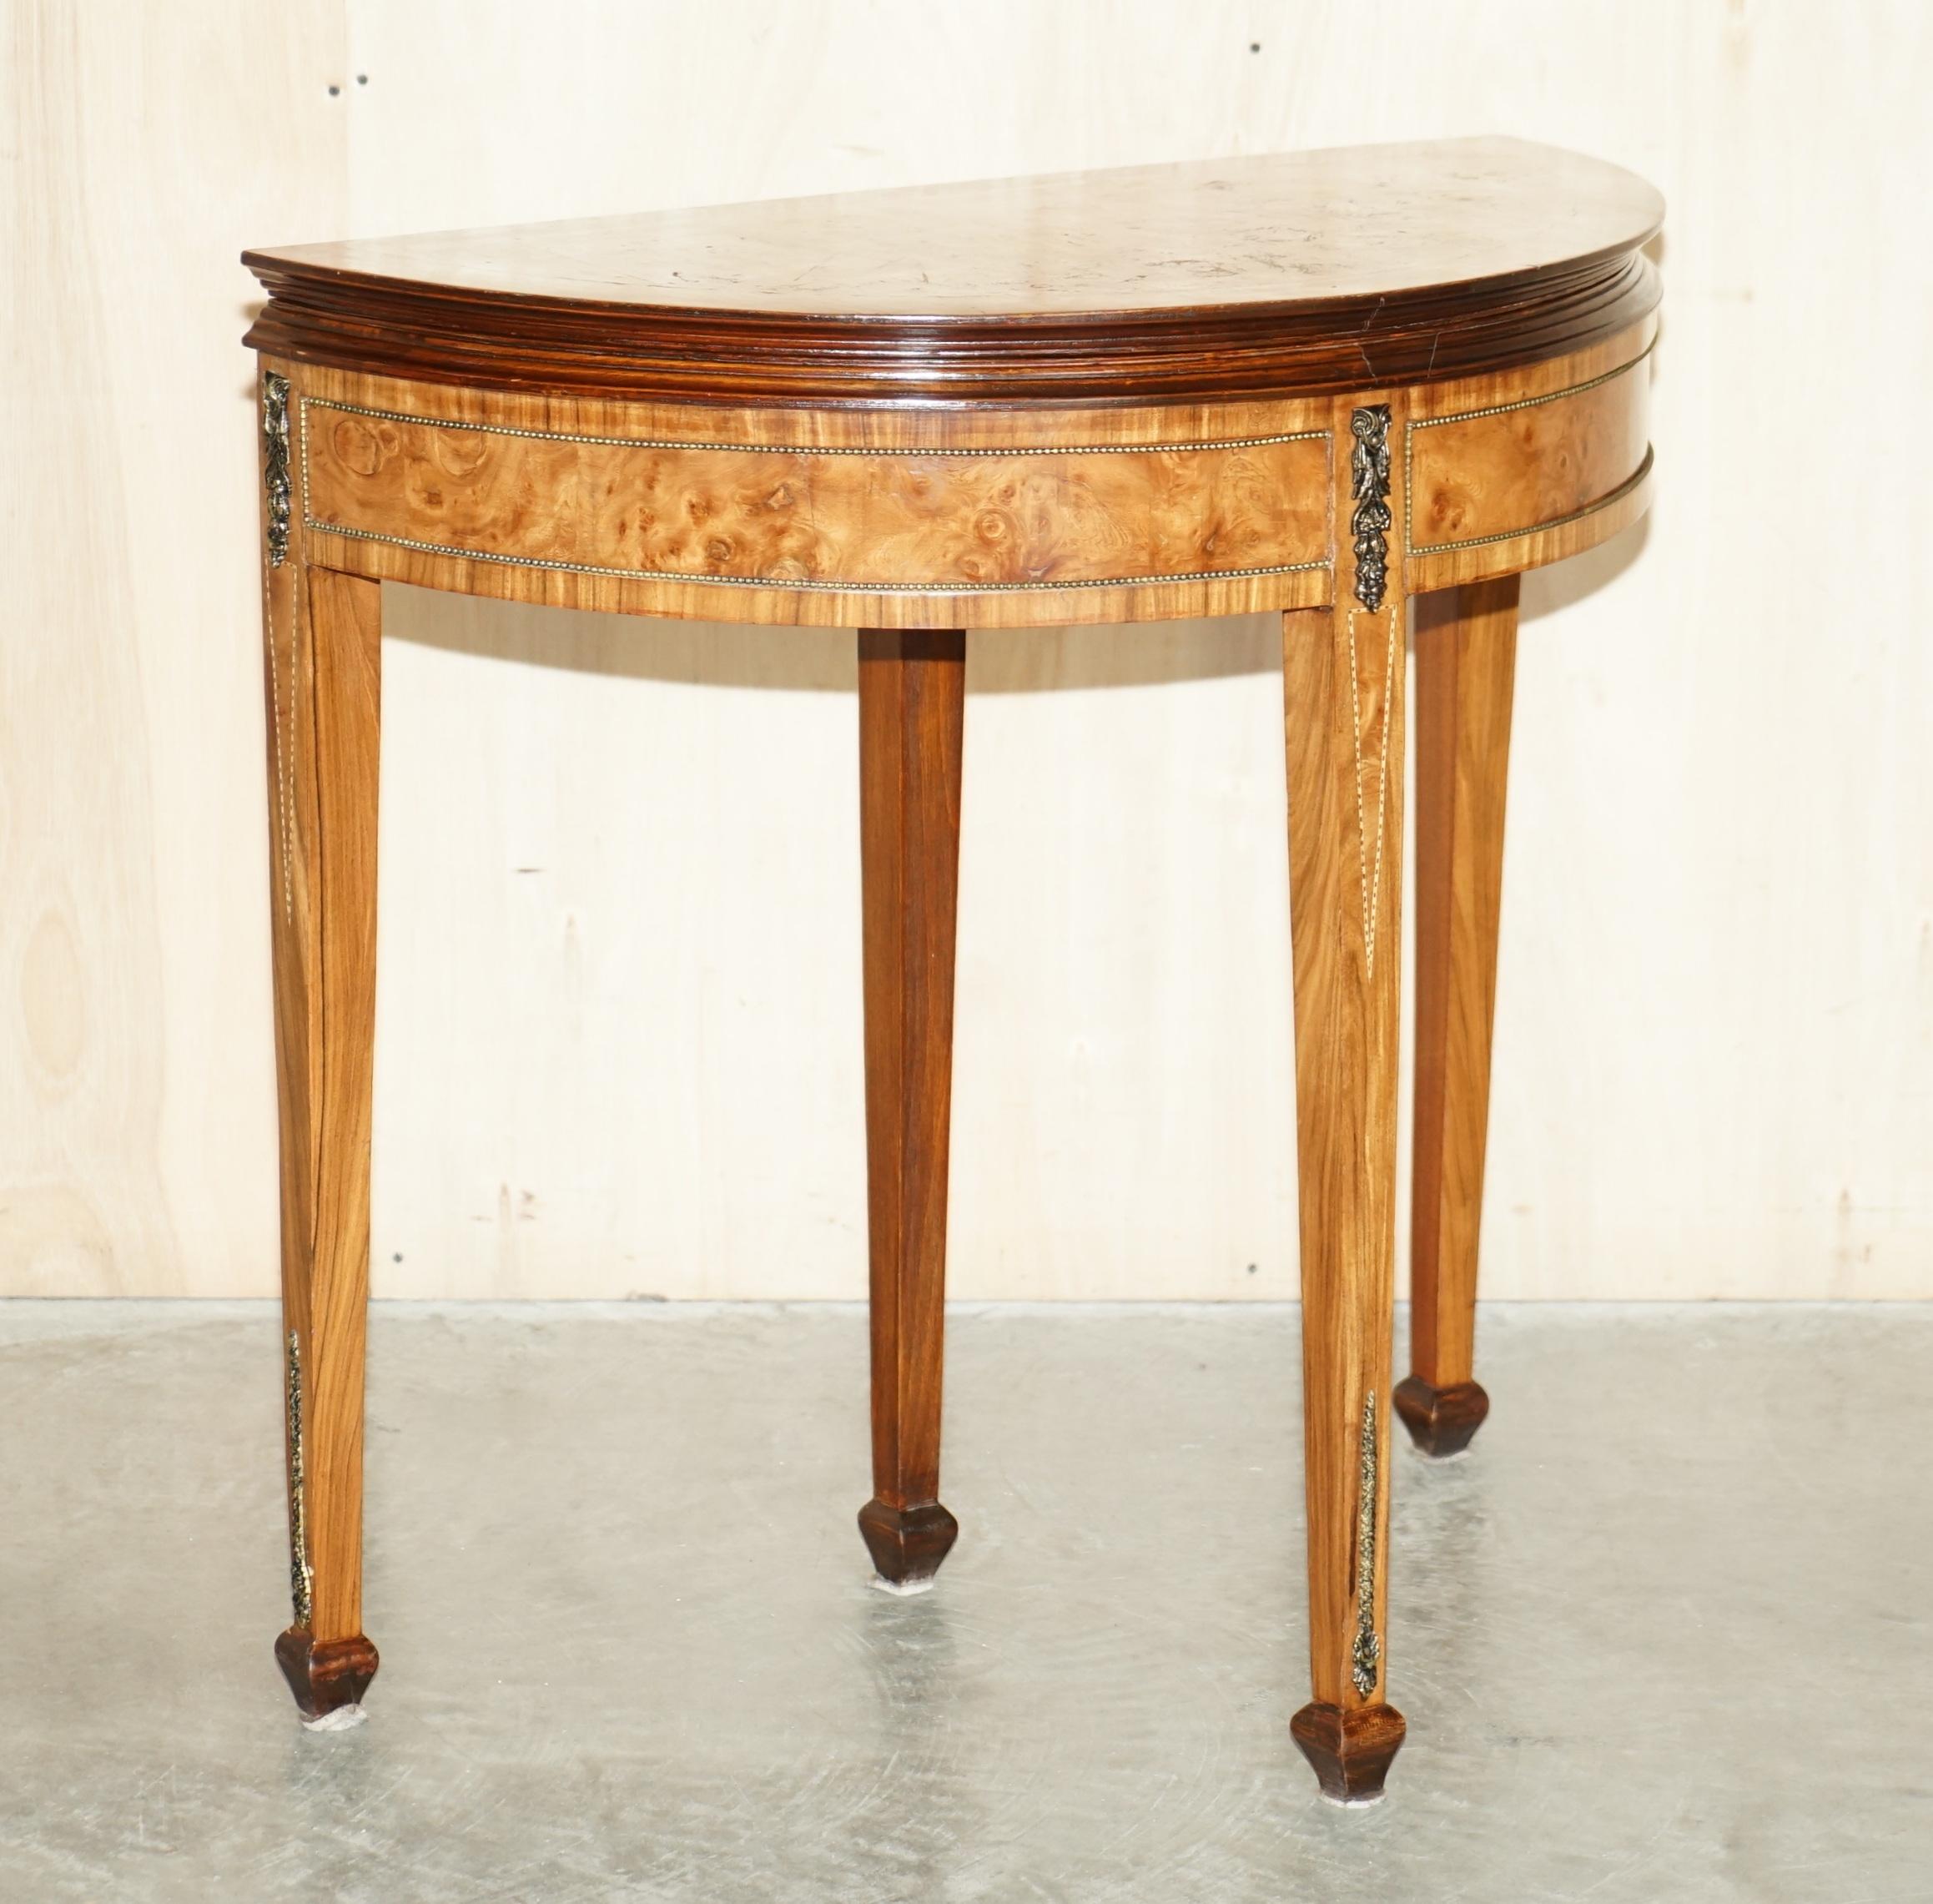 We are delighted to offer for sale this lovely circa 1900-1920 burr walnut demi lune games card table with lovely burl finish.

A very good looking and well made piece, made in the Regency style however it is late Victorian to Edwardian. The piece